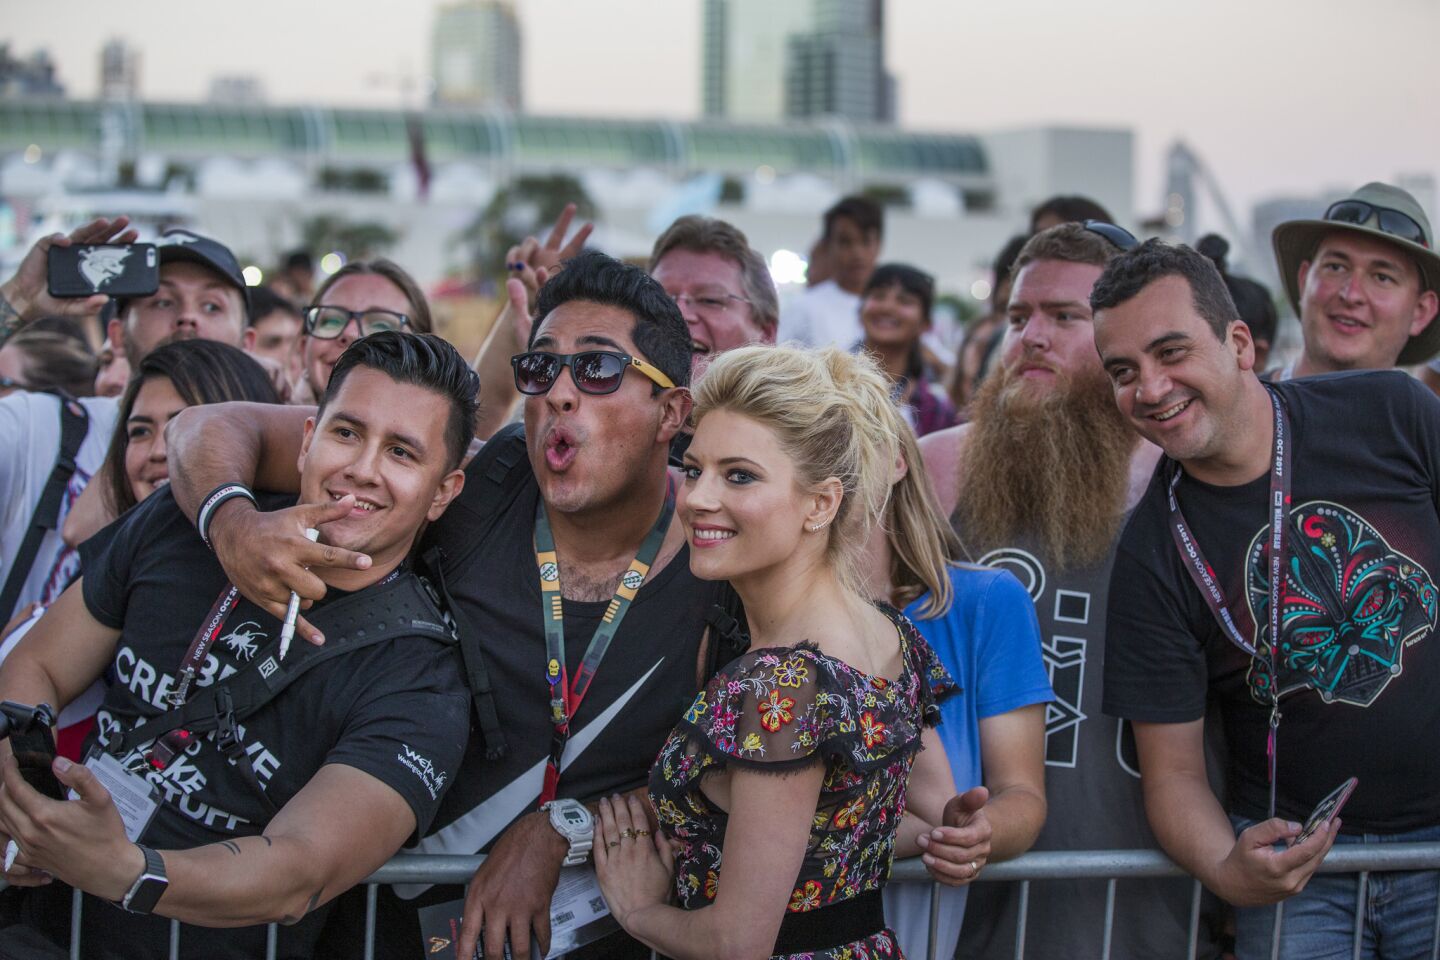 Katheryn Winnick, who plays Lagertha in the History Channel's "Vikings," poses for photos with fans.